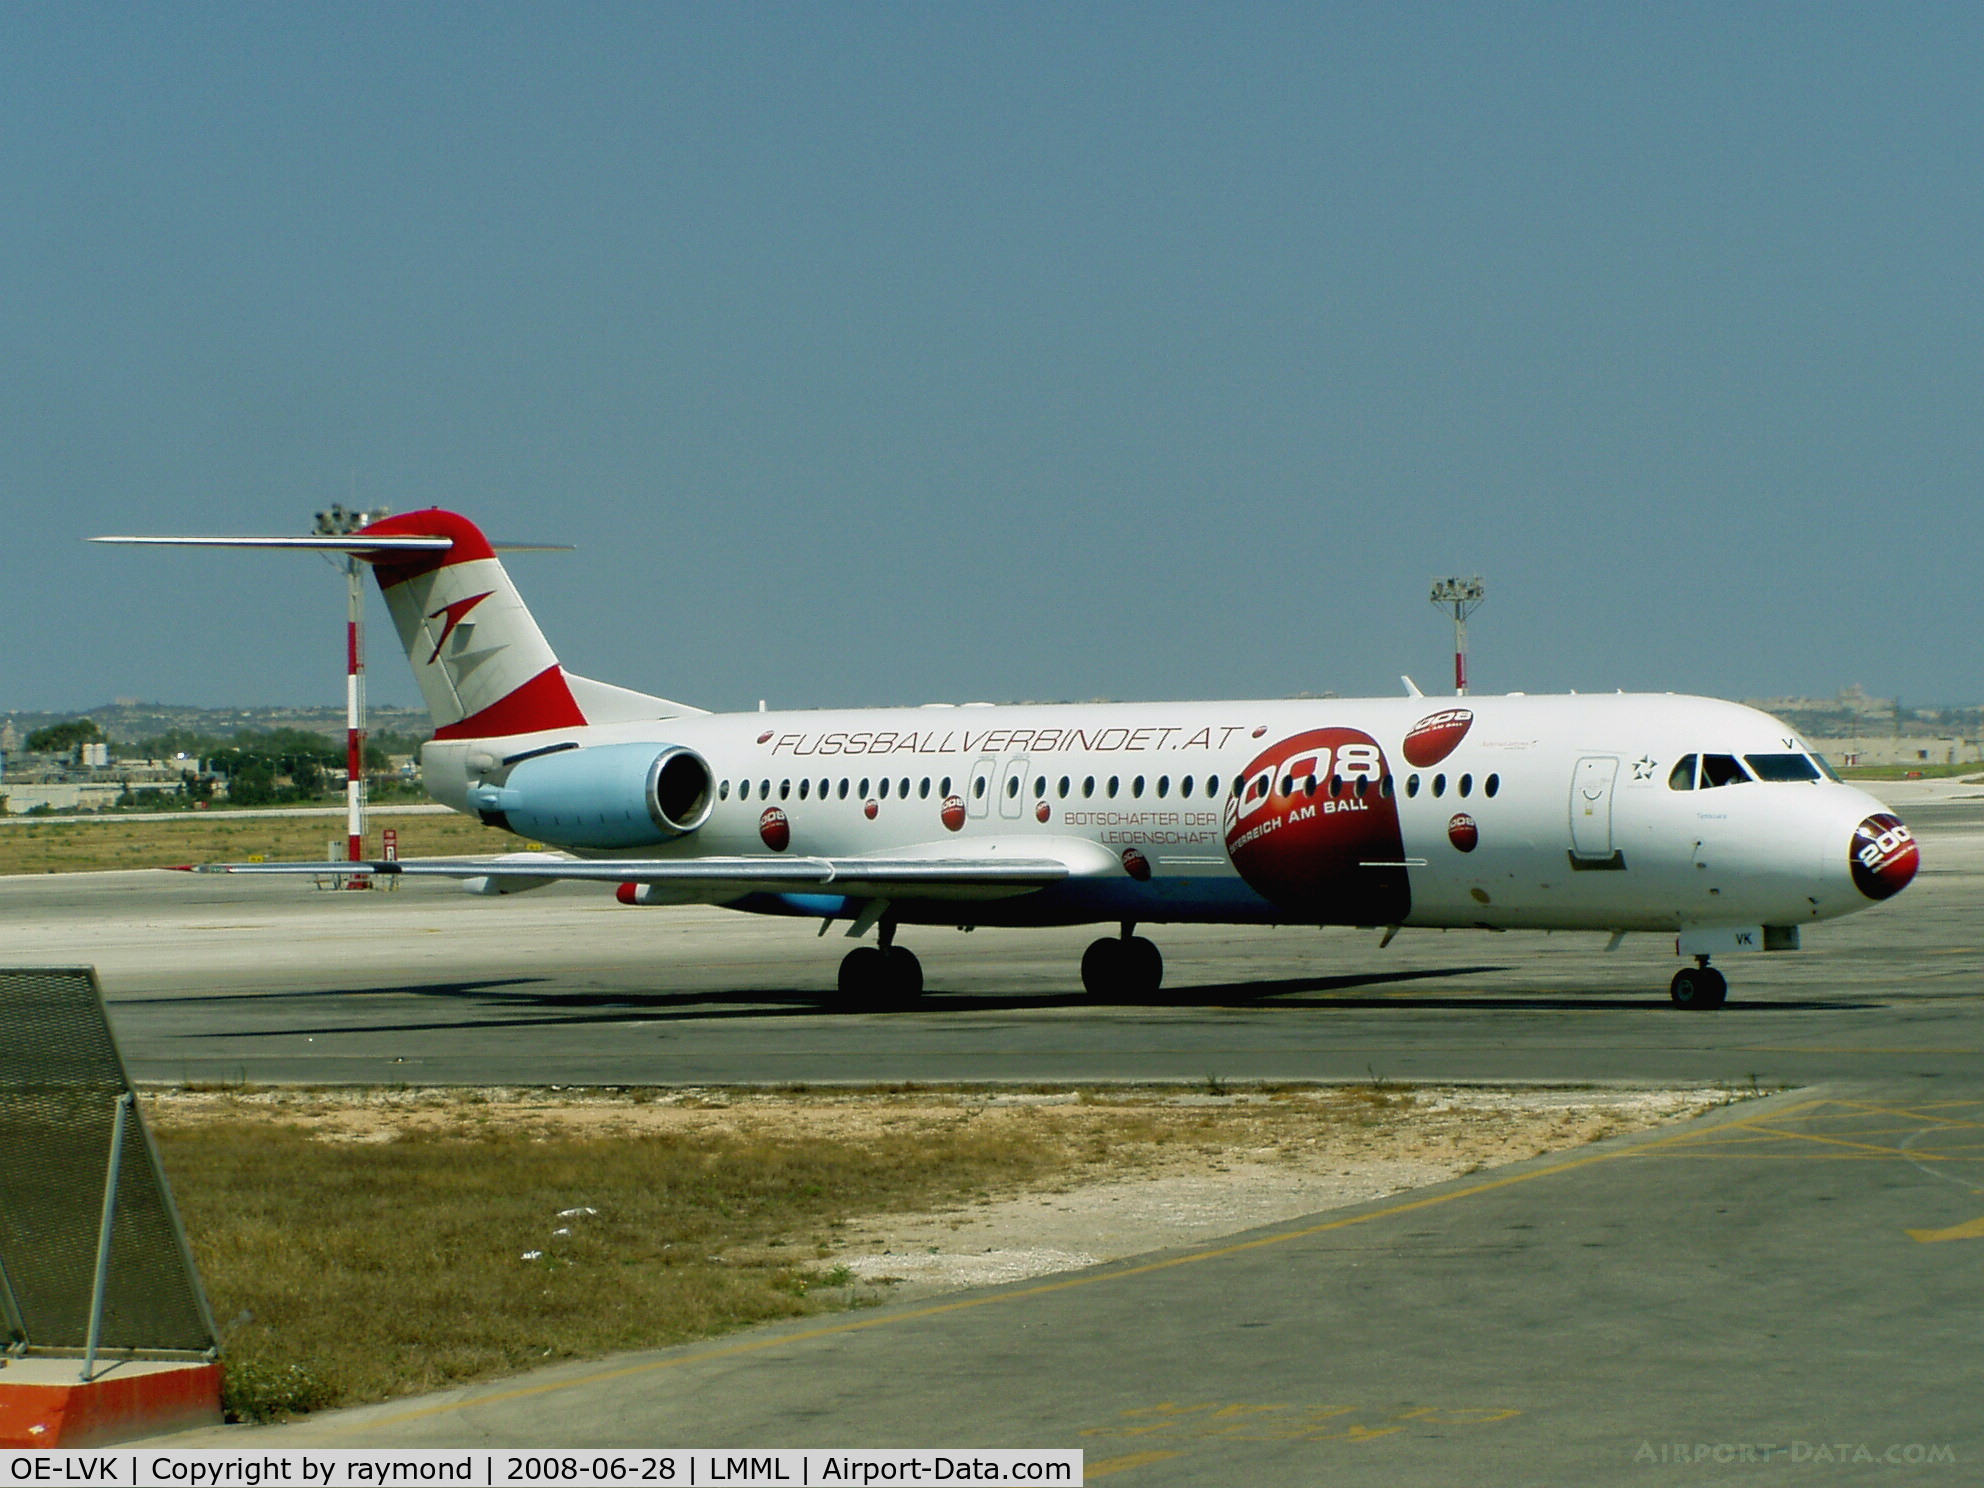 OE-LVK, 1992 Fokker 100 (F-28-0100) C/N 11397, F100 OE-LVK of Austrian Airlines in special Euro2008 football livery.